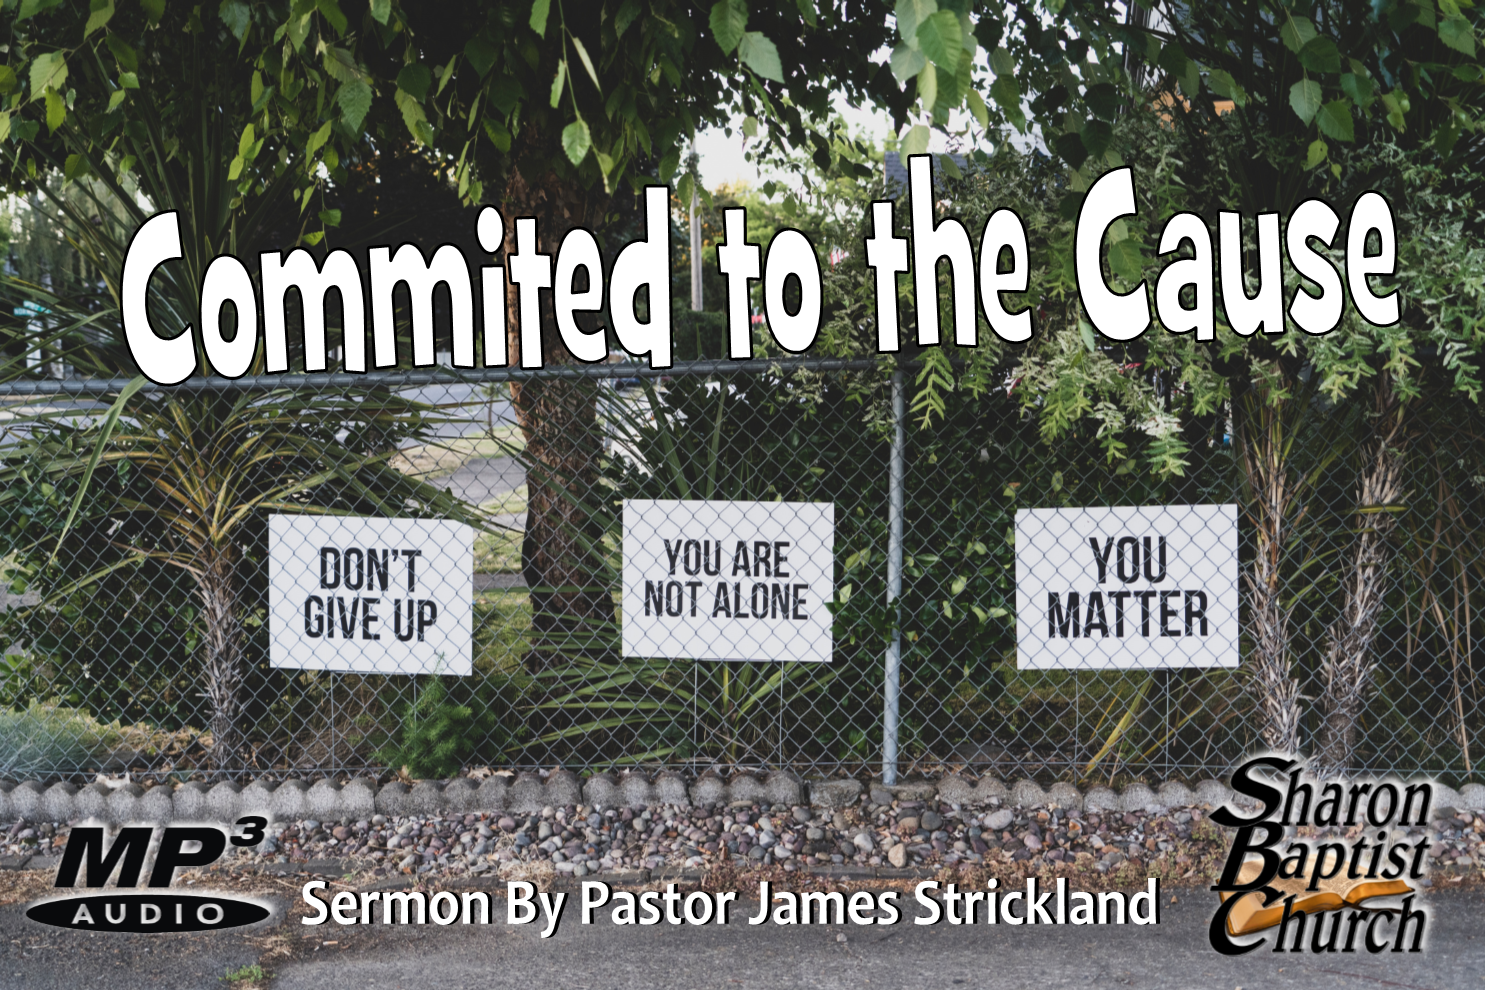 Committed to the Cause 9-8-19 SERMON Audio MP3